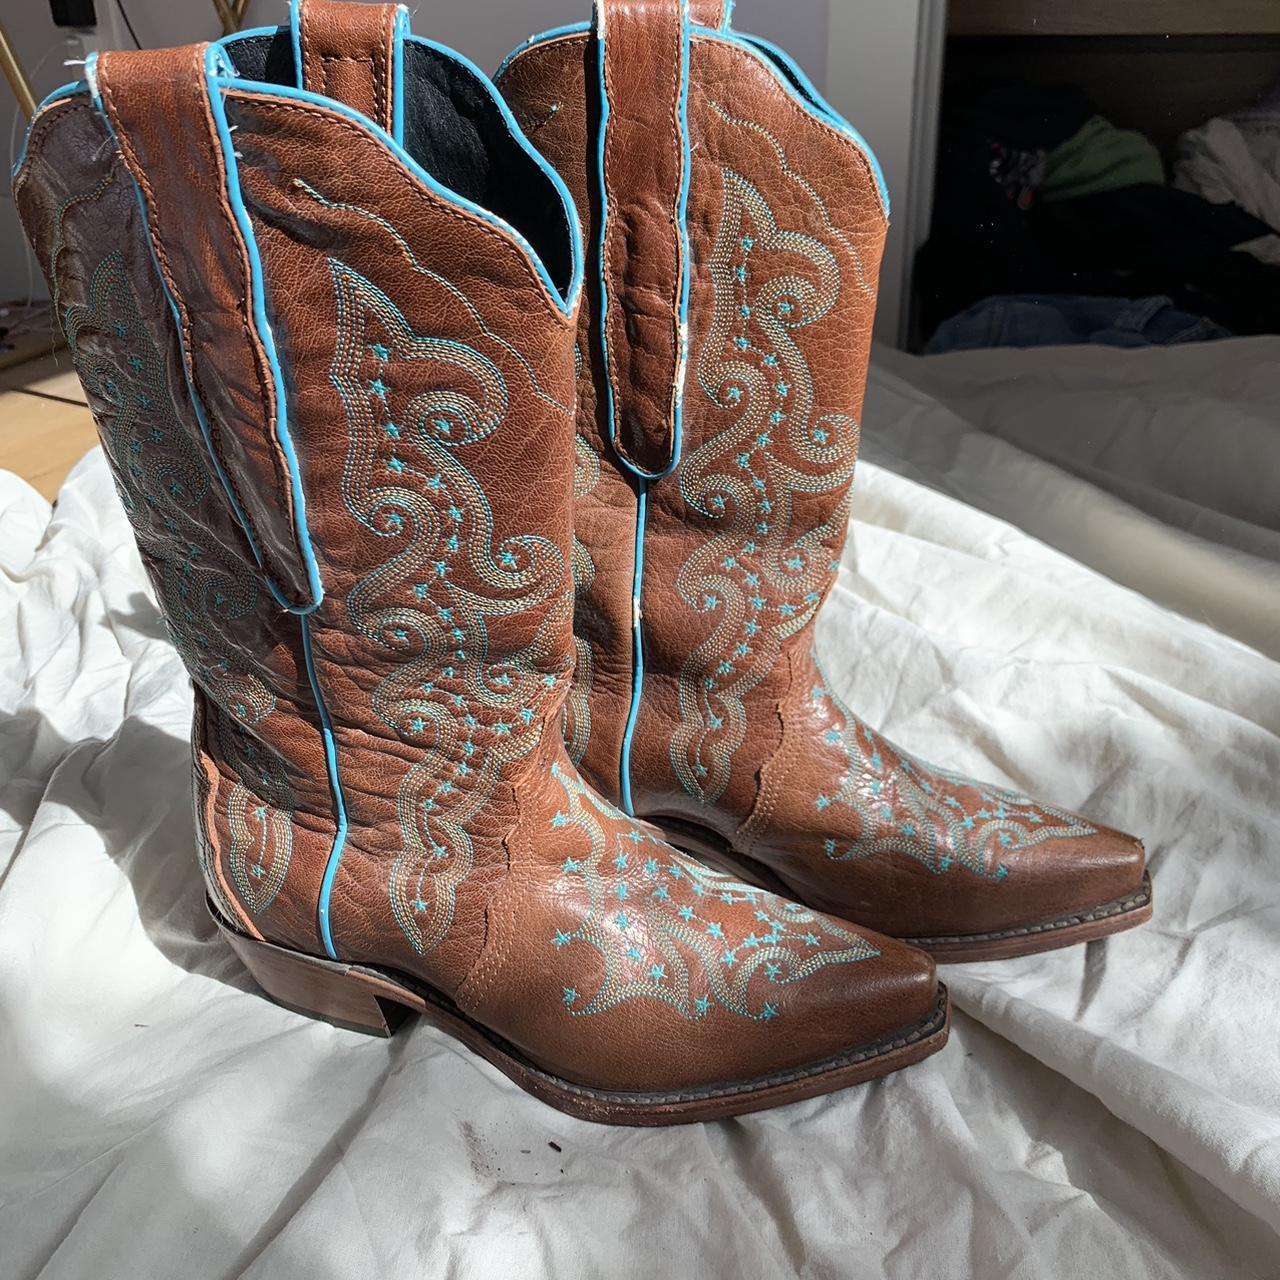 Women's Brown and Blue Boots | Depop